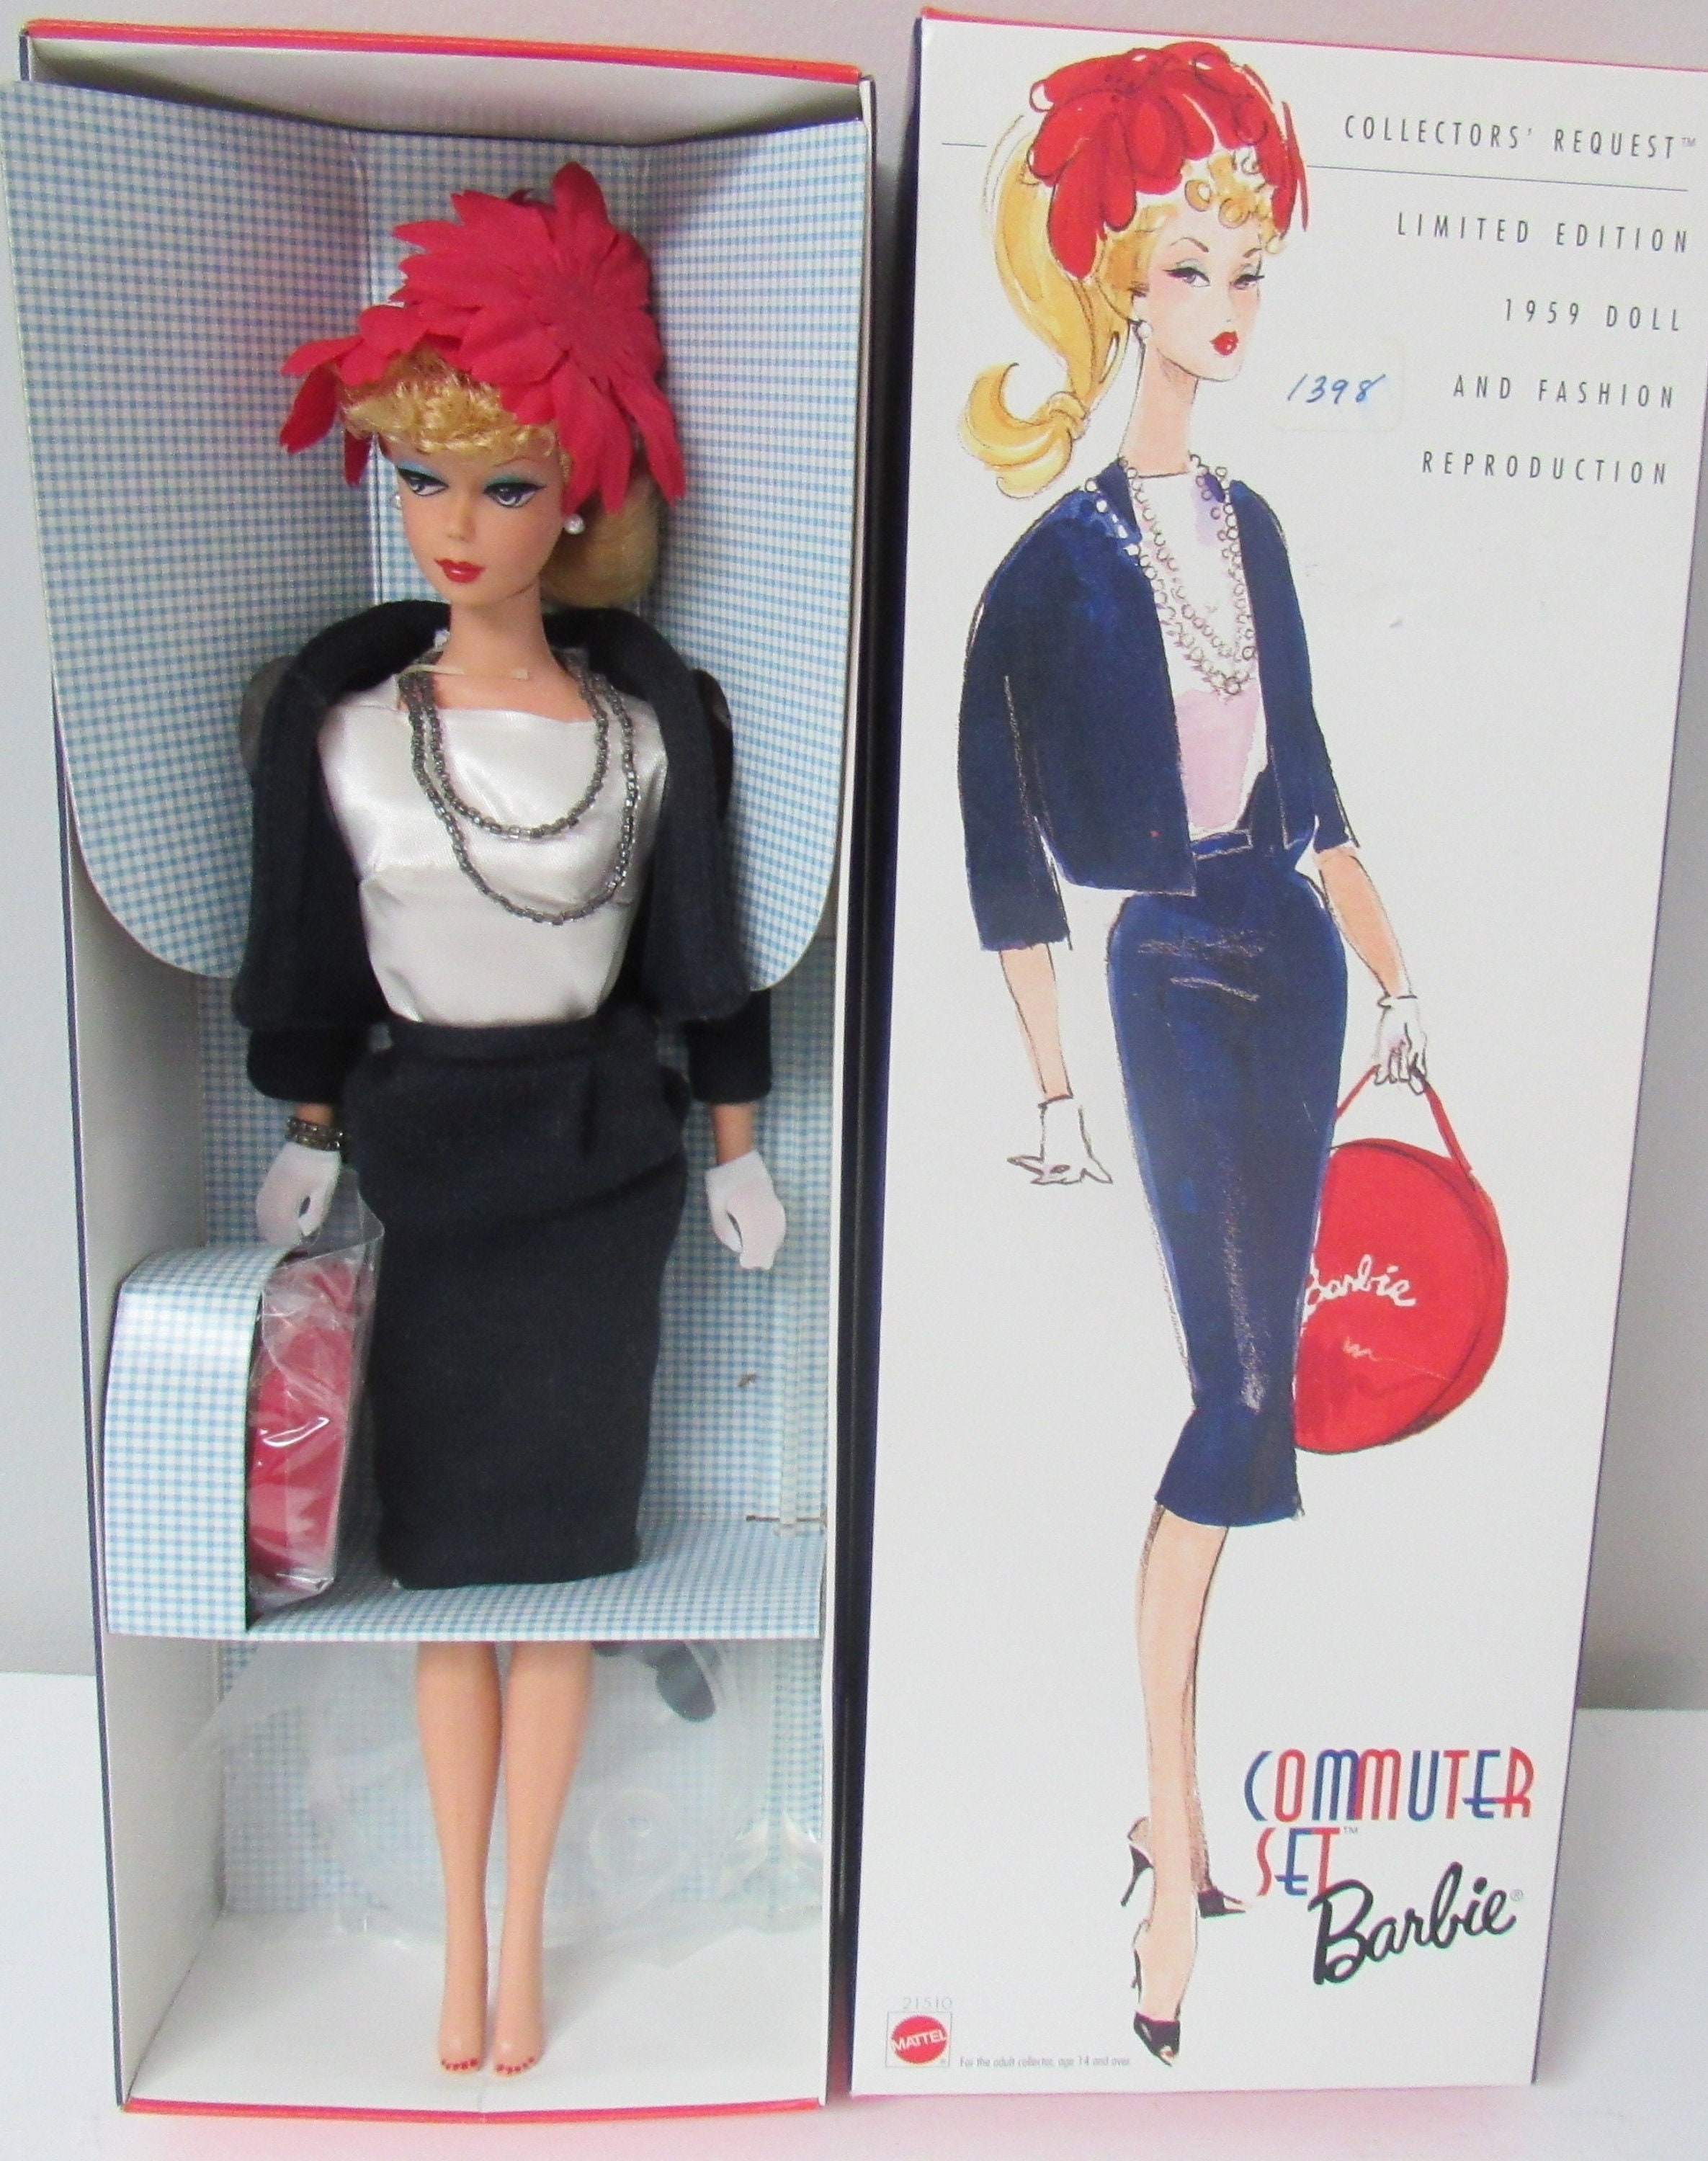 Commuter Set Barbie Doll Collector's Request Limited Edition